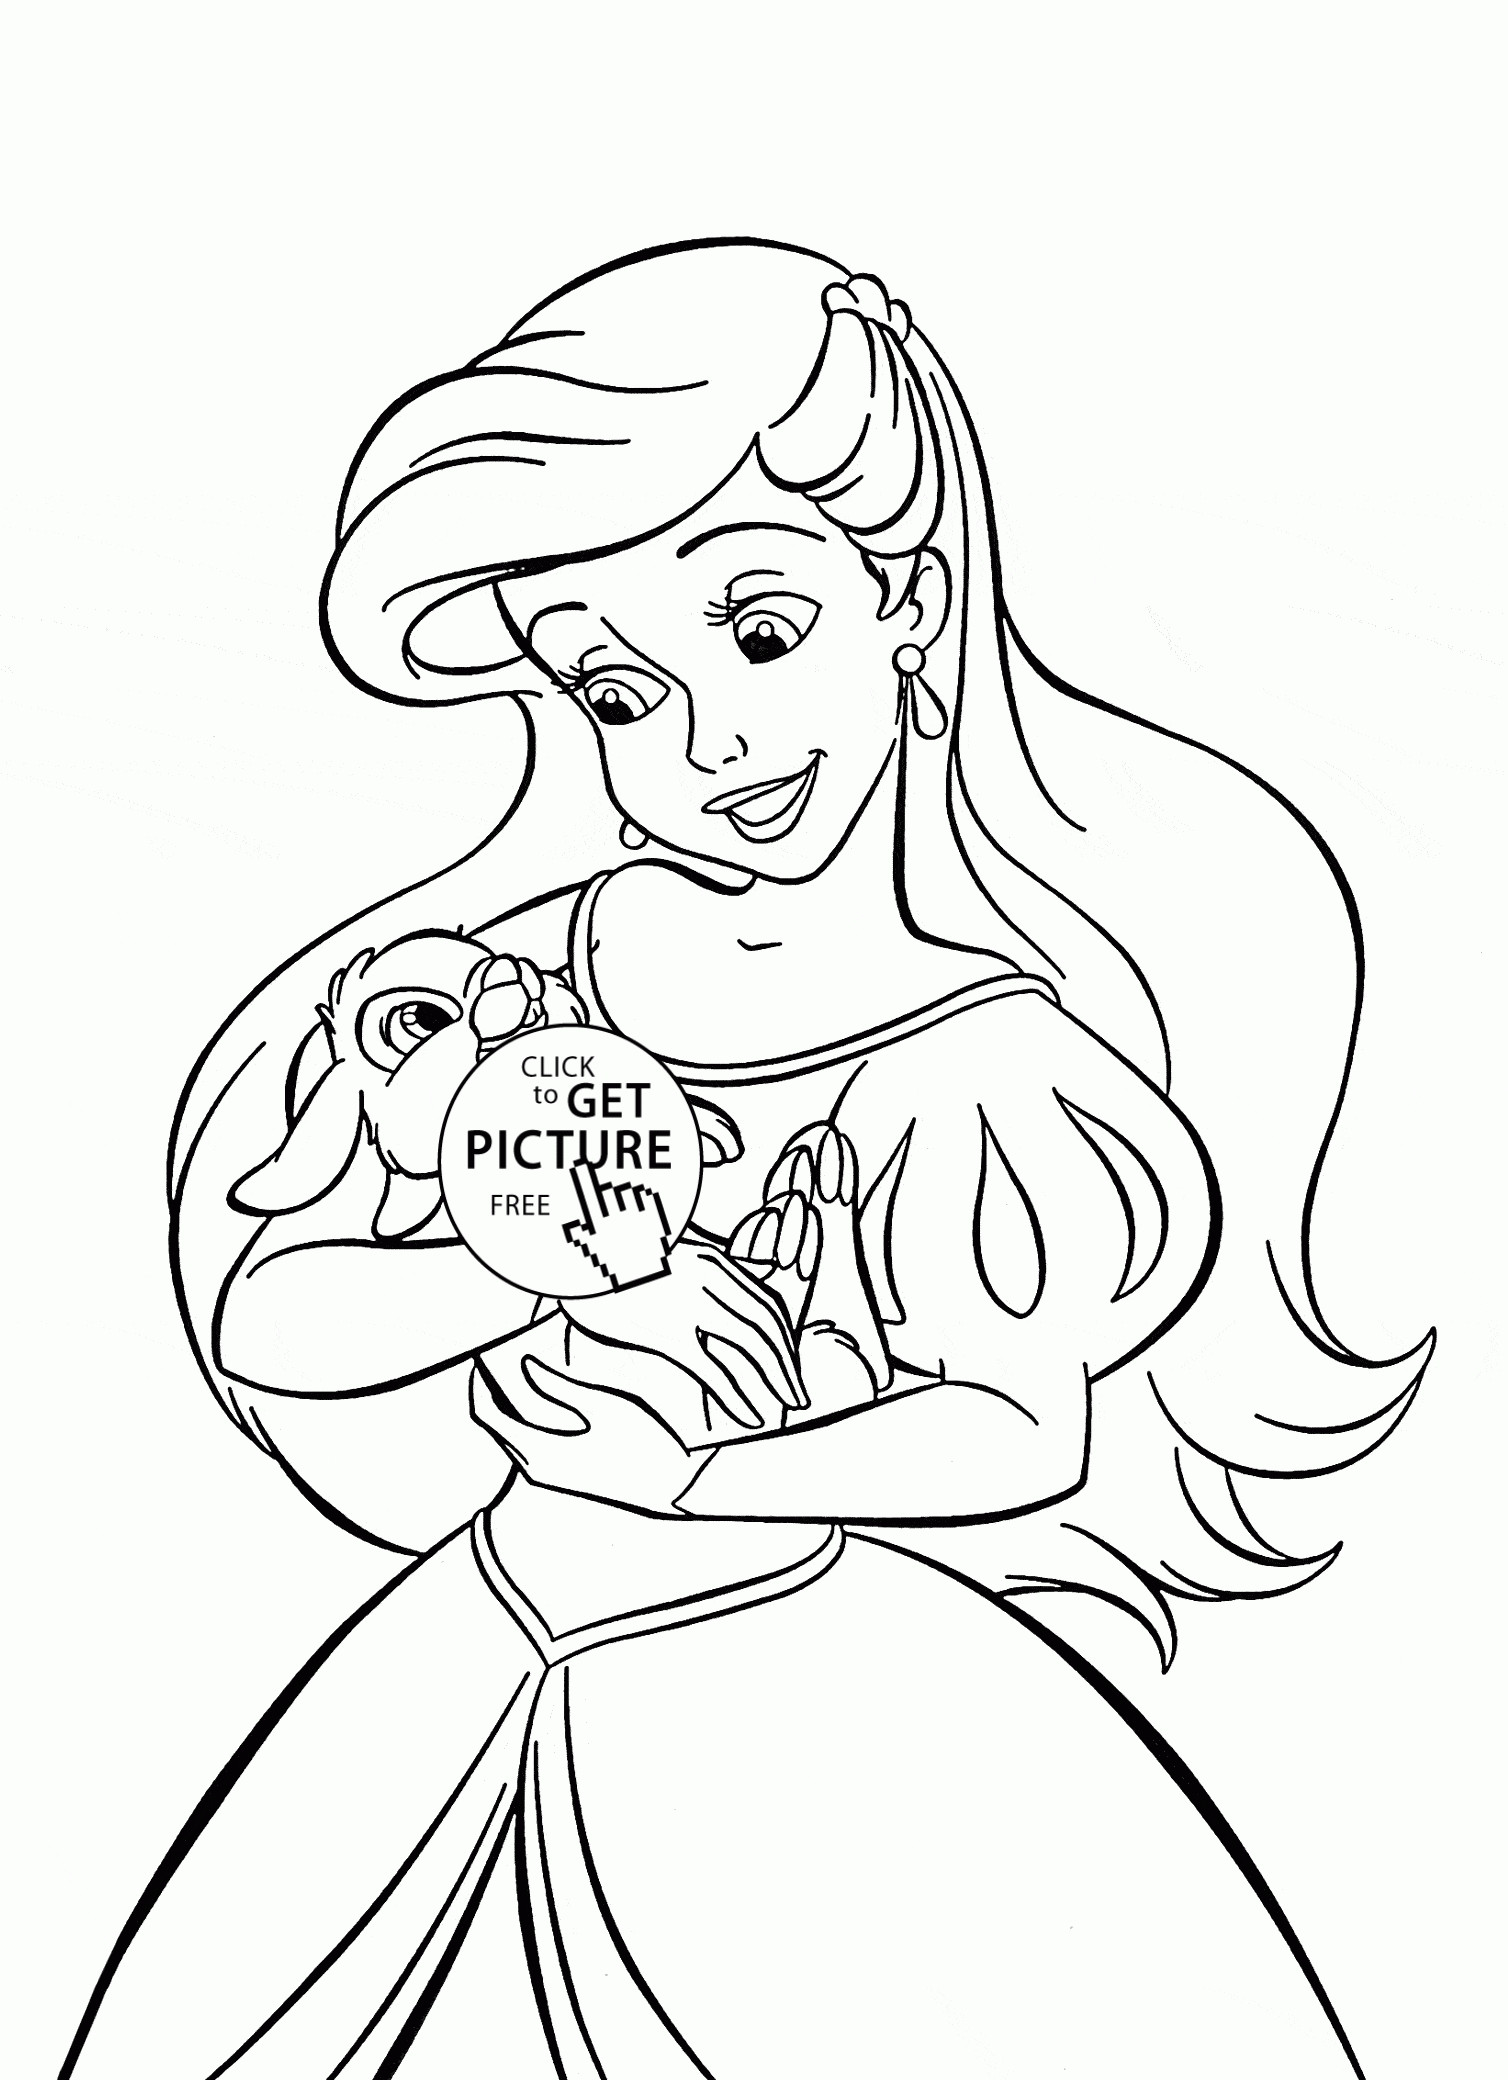 Coloring Pages For Girls Princess
 Disney Princess Ariel Coloring Pages For Girls